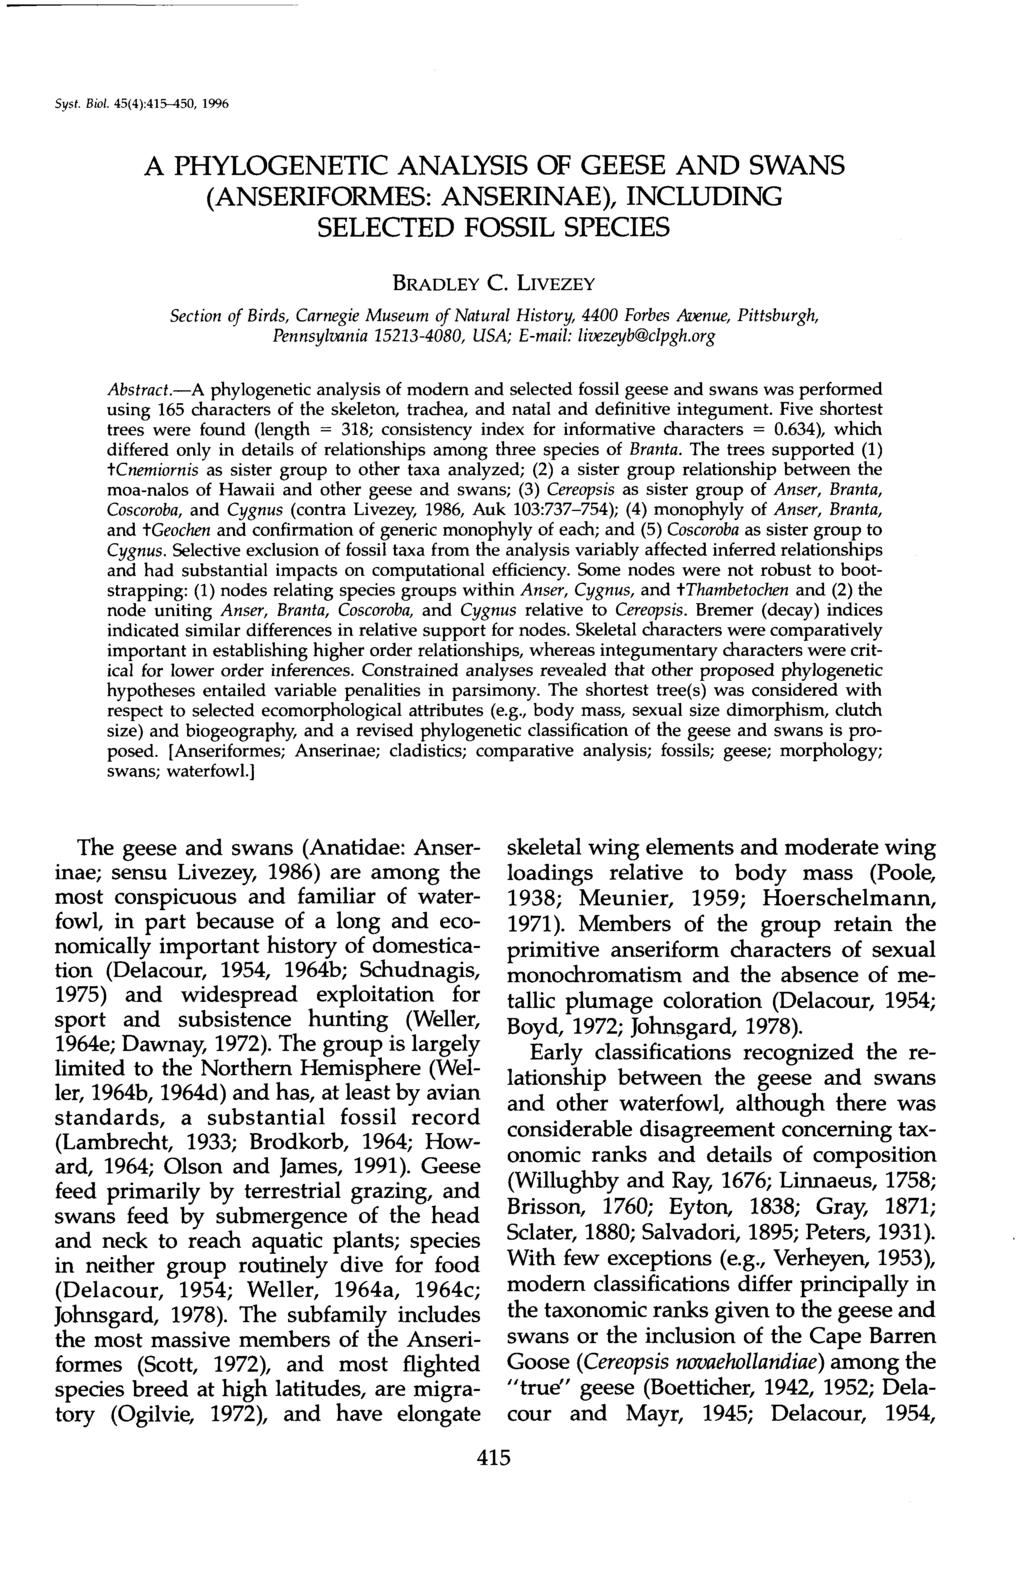 Syst. Biol. 45(4):415-450, 1996 A PHYLOGENETIC ANALYSIS OF GEESE AND SWANS (ANSERIFORMES: ANSERINAE), INCLUDING SELECTED FOSSIL SPECIES BRADLEY C.